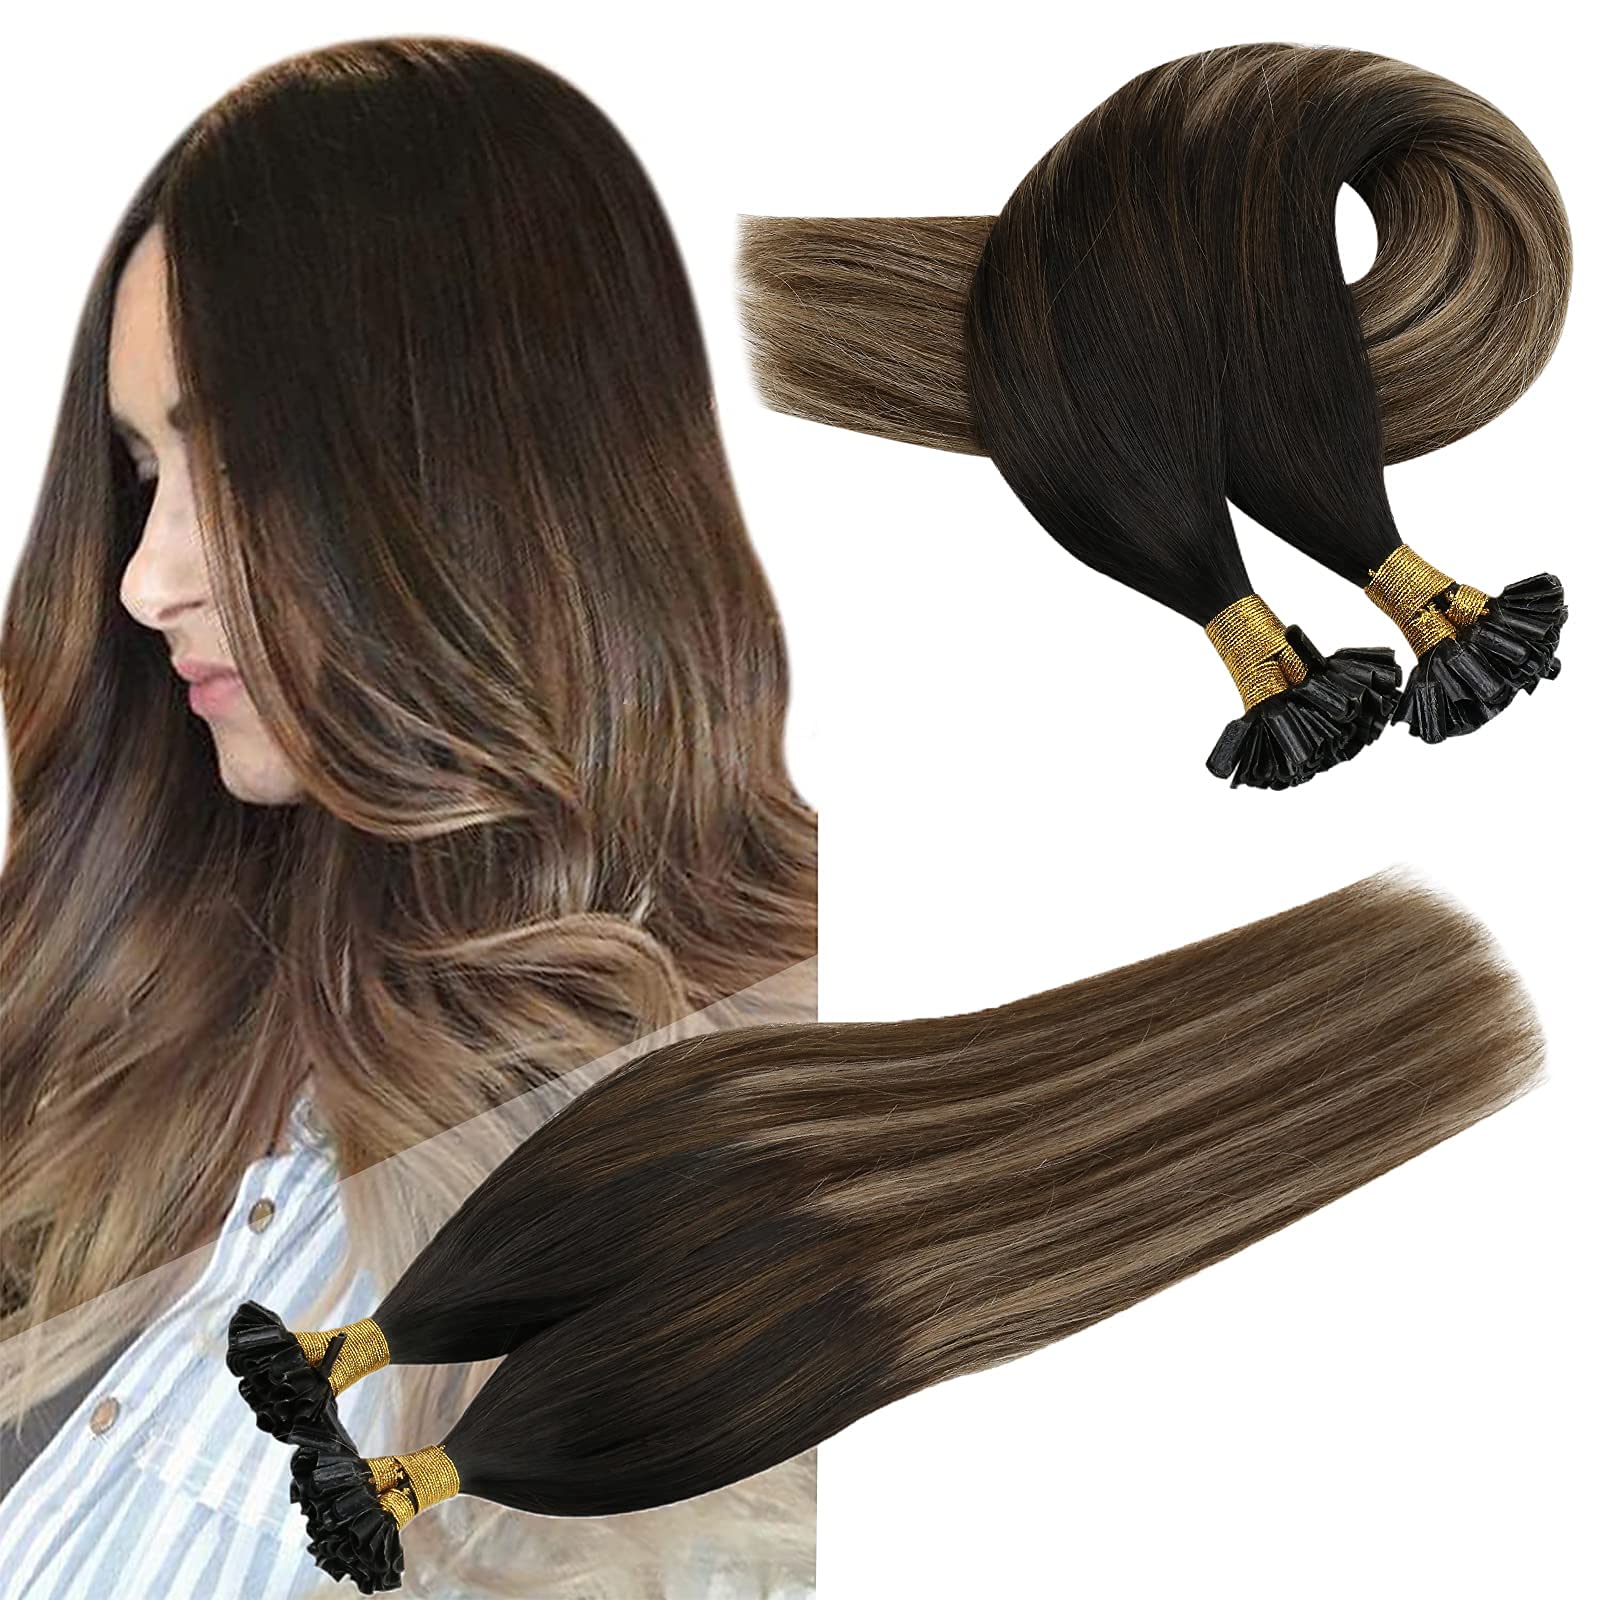 u-tip-hair-extension-the-wise-new-choice-of-hair-extensions-users